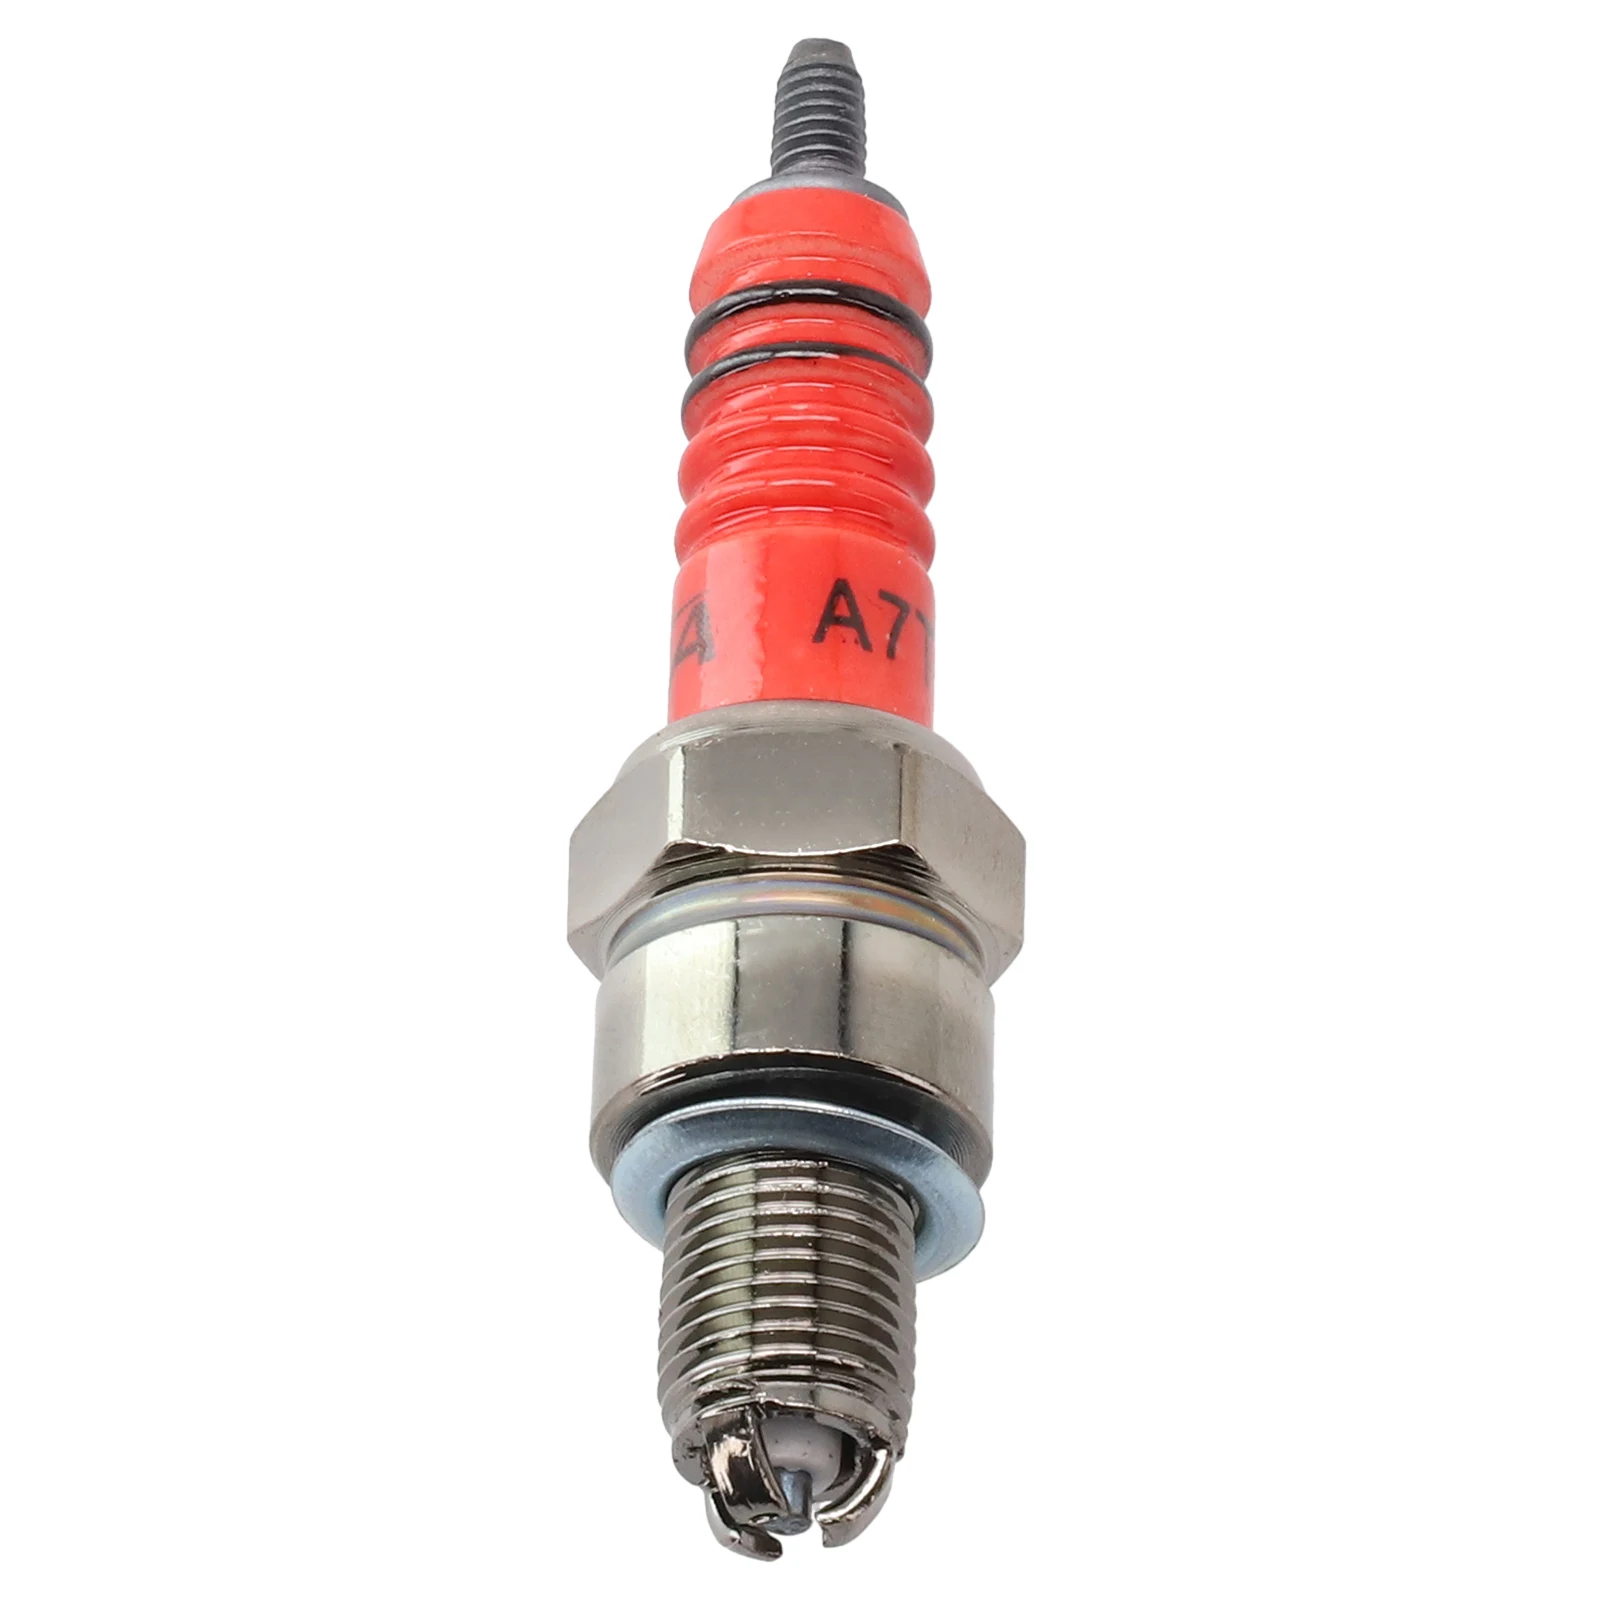 

Car Spark Plug ATRTC 10mm High Performance 3-Electrode For GY6 50cc-150cc Motorcycle Scooter Triple CR7HSA CR7HGP